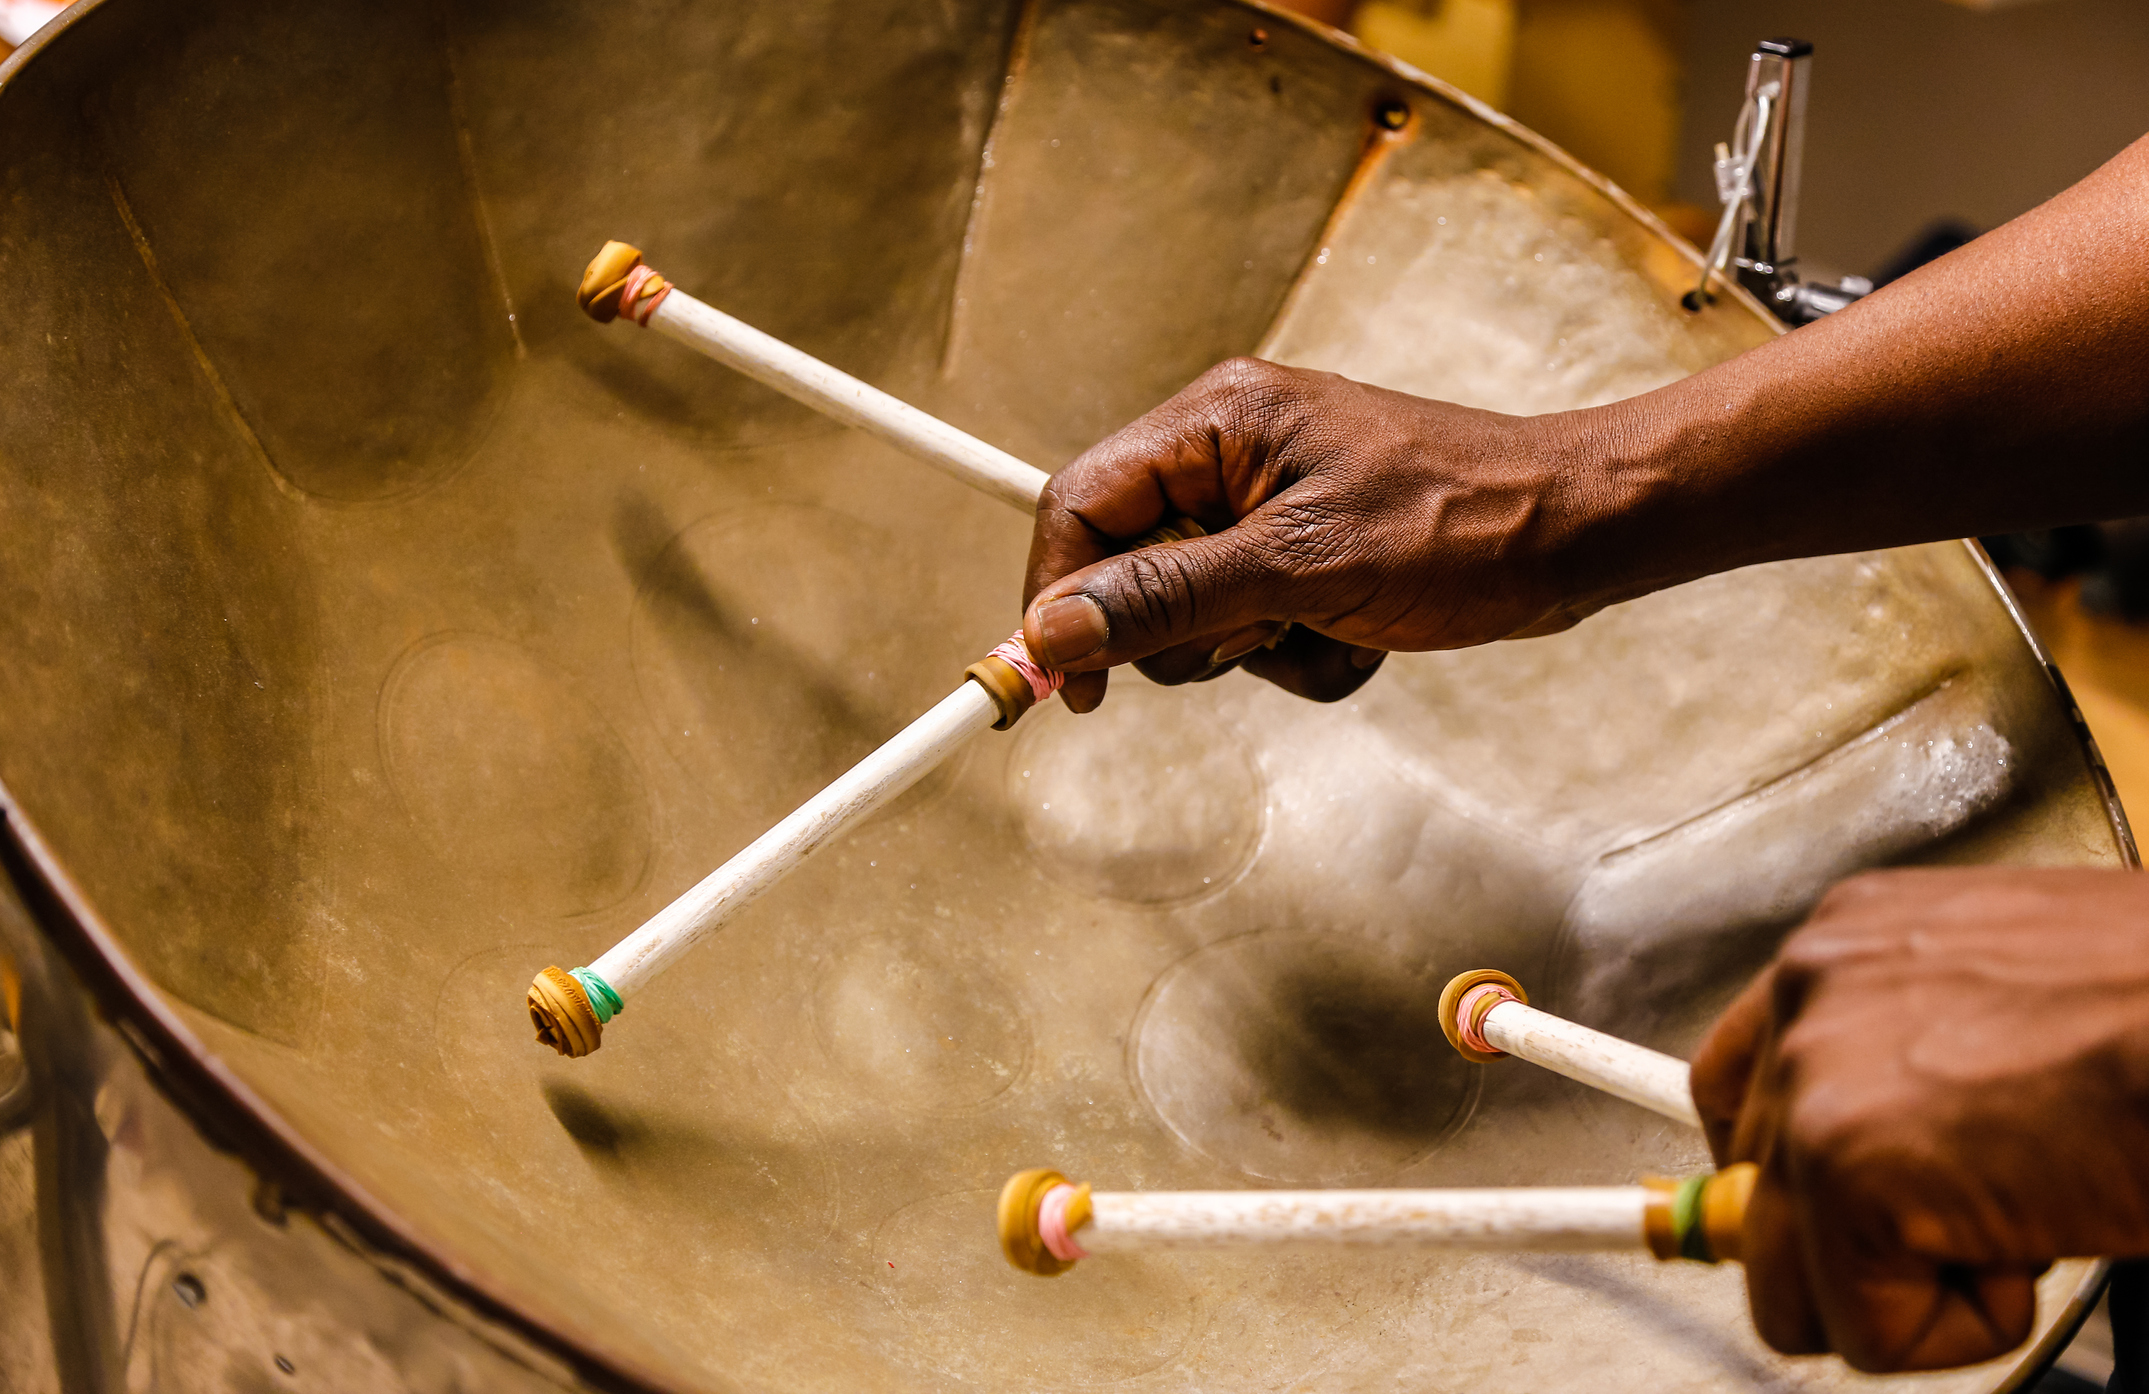 A Caribbean Instrument: The History of the Steel Pan